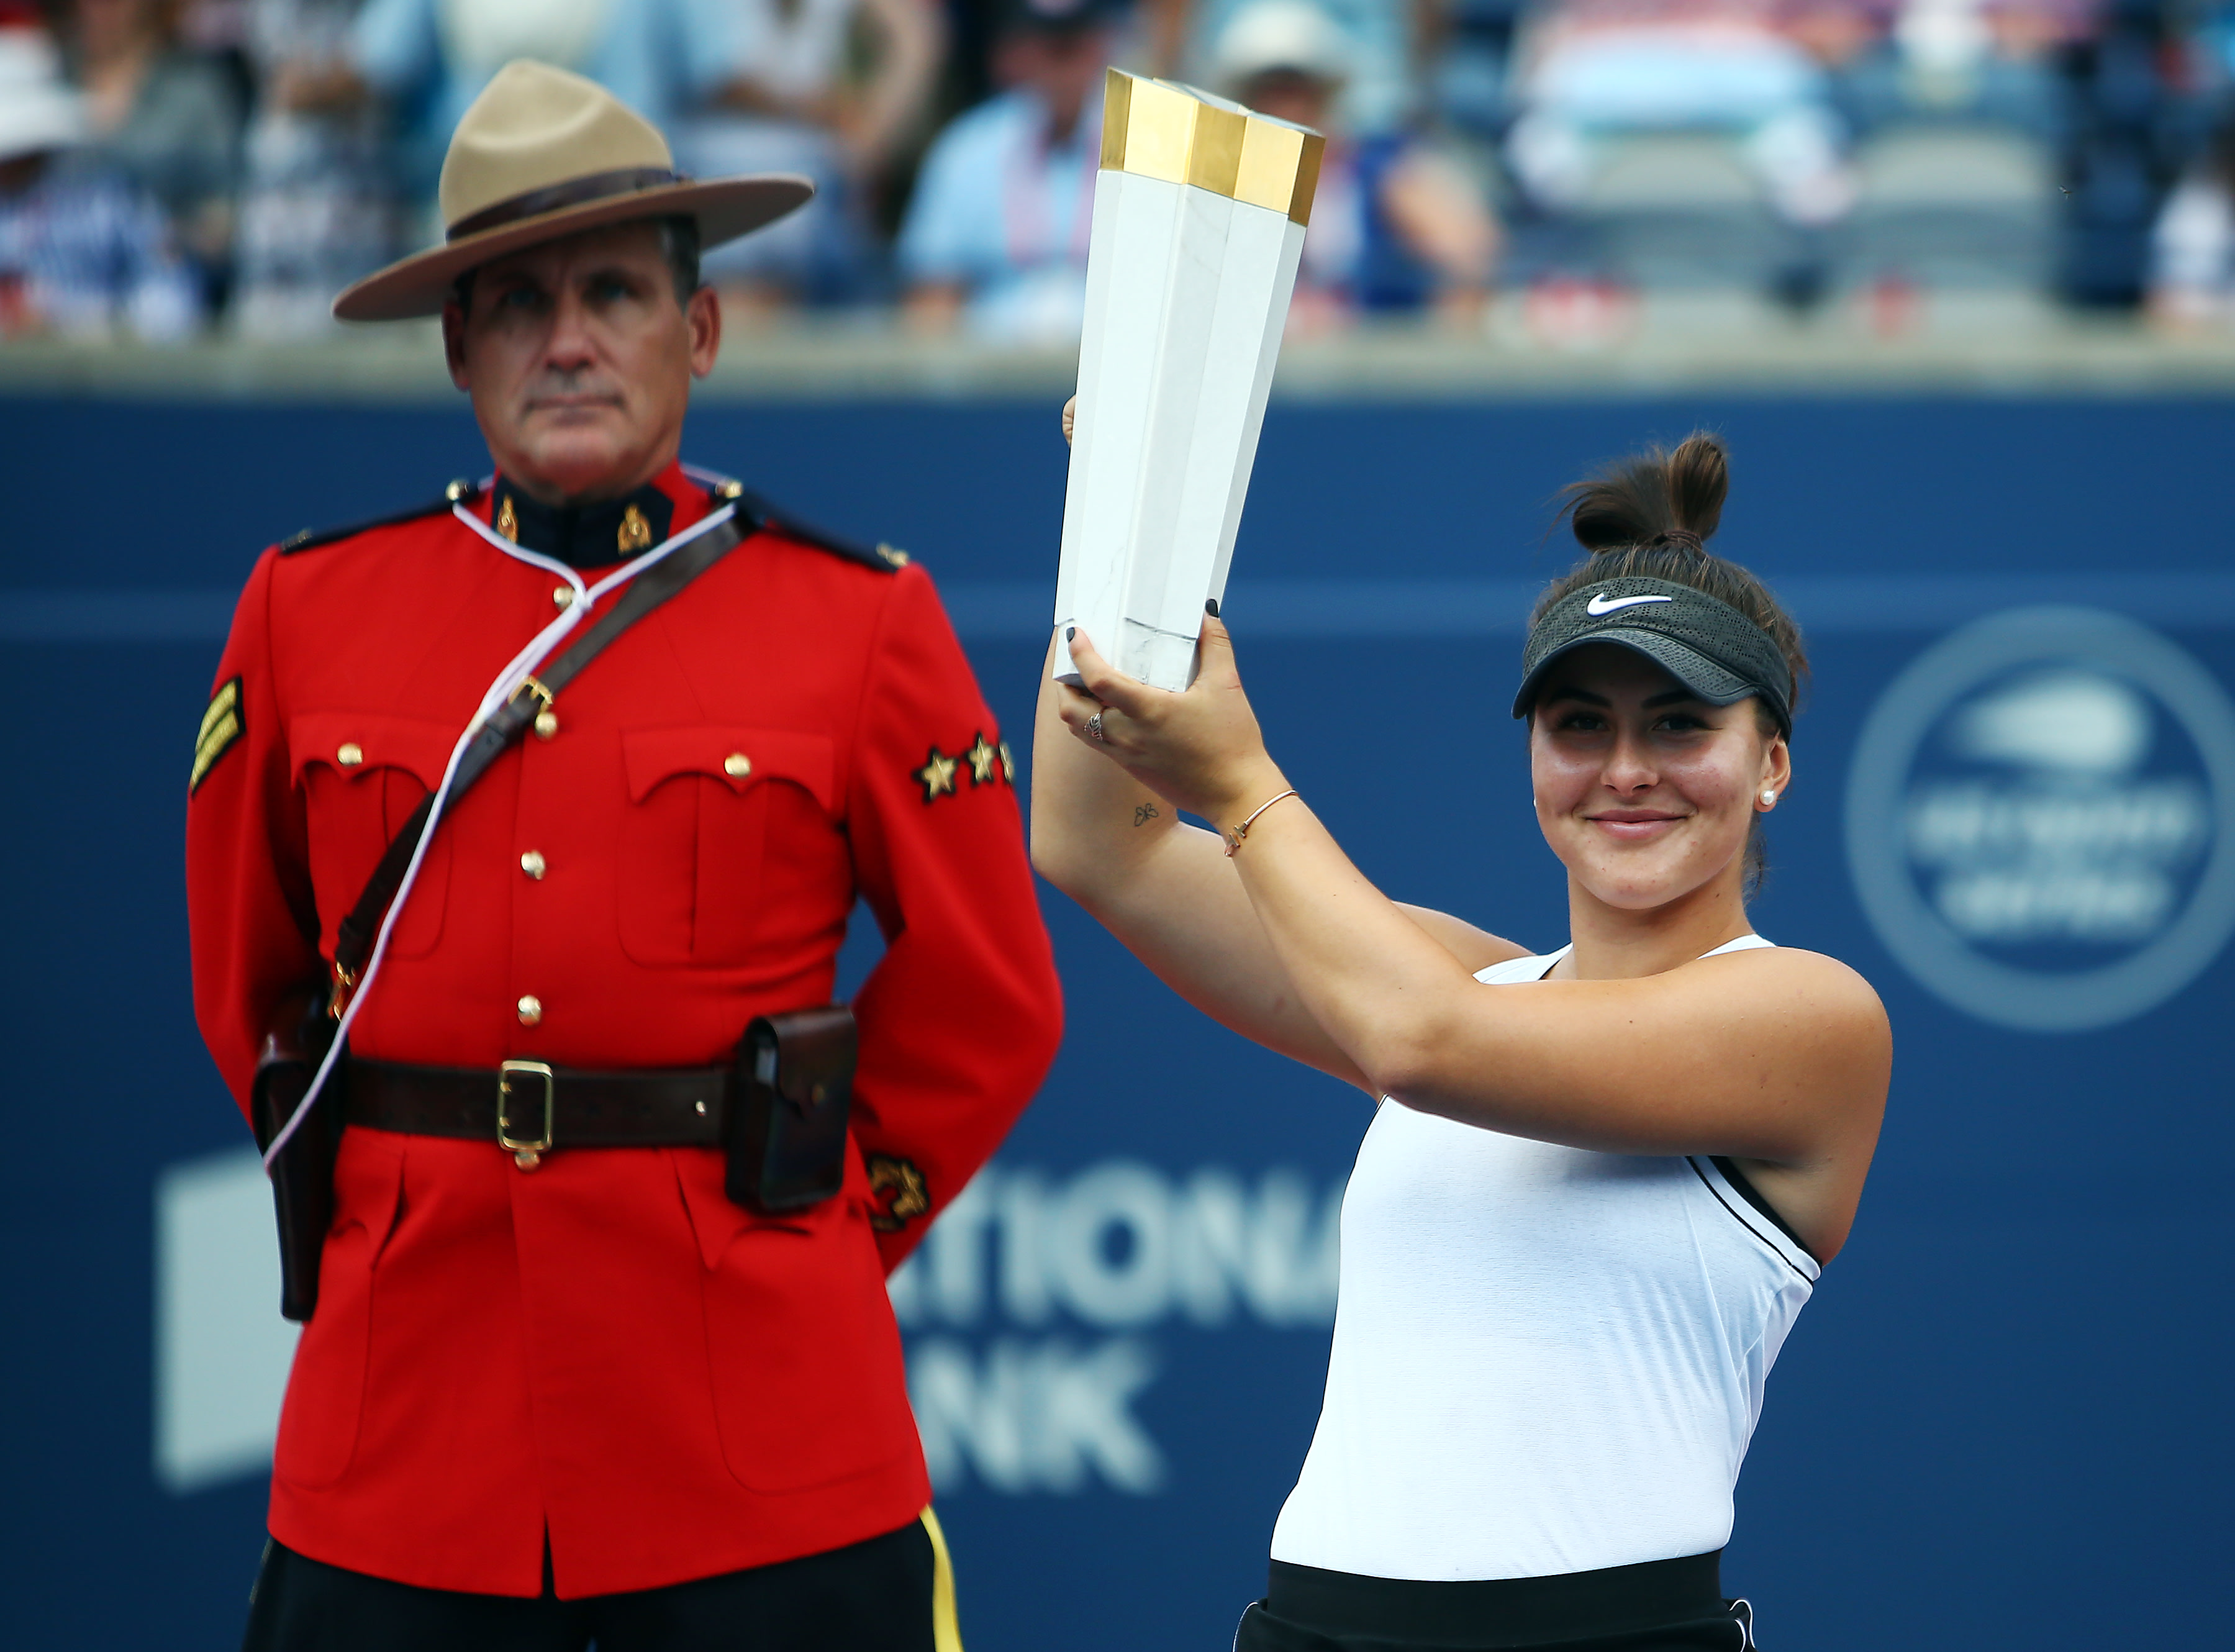 Andreescu's coach says the teen is "among" the favorites at US Open